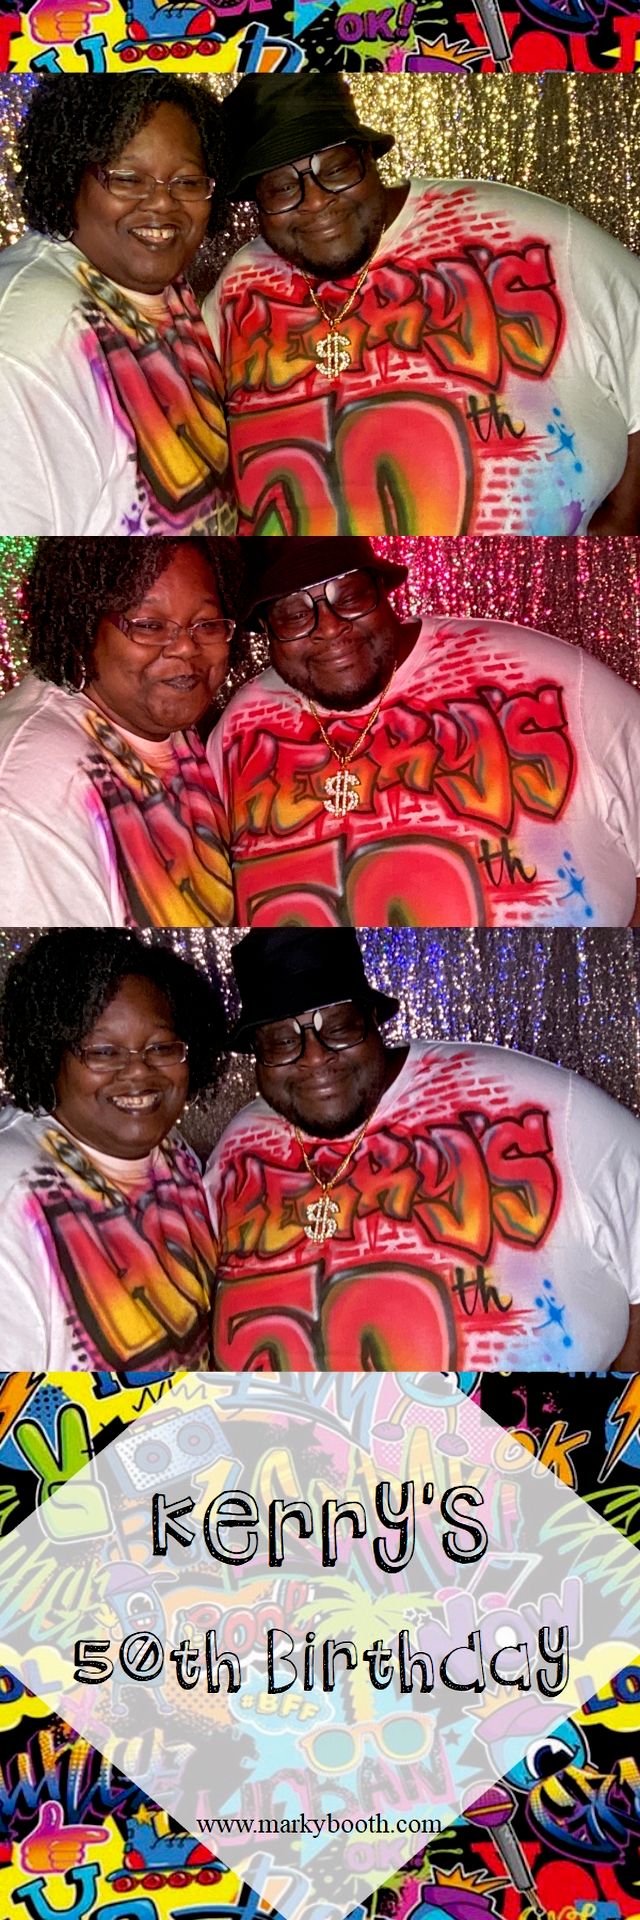 Photo Booths - Marky Booth